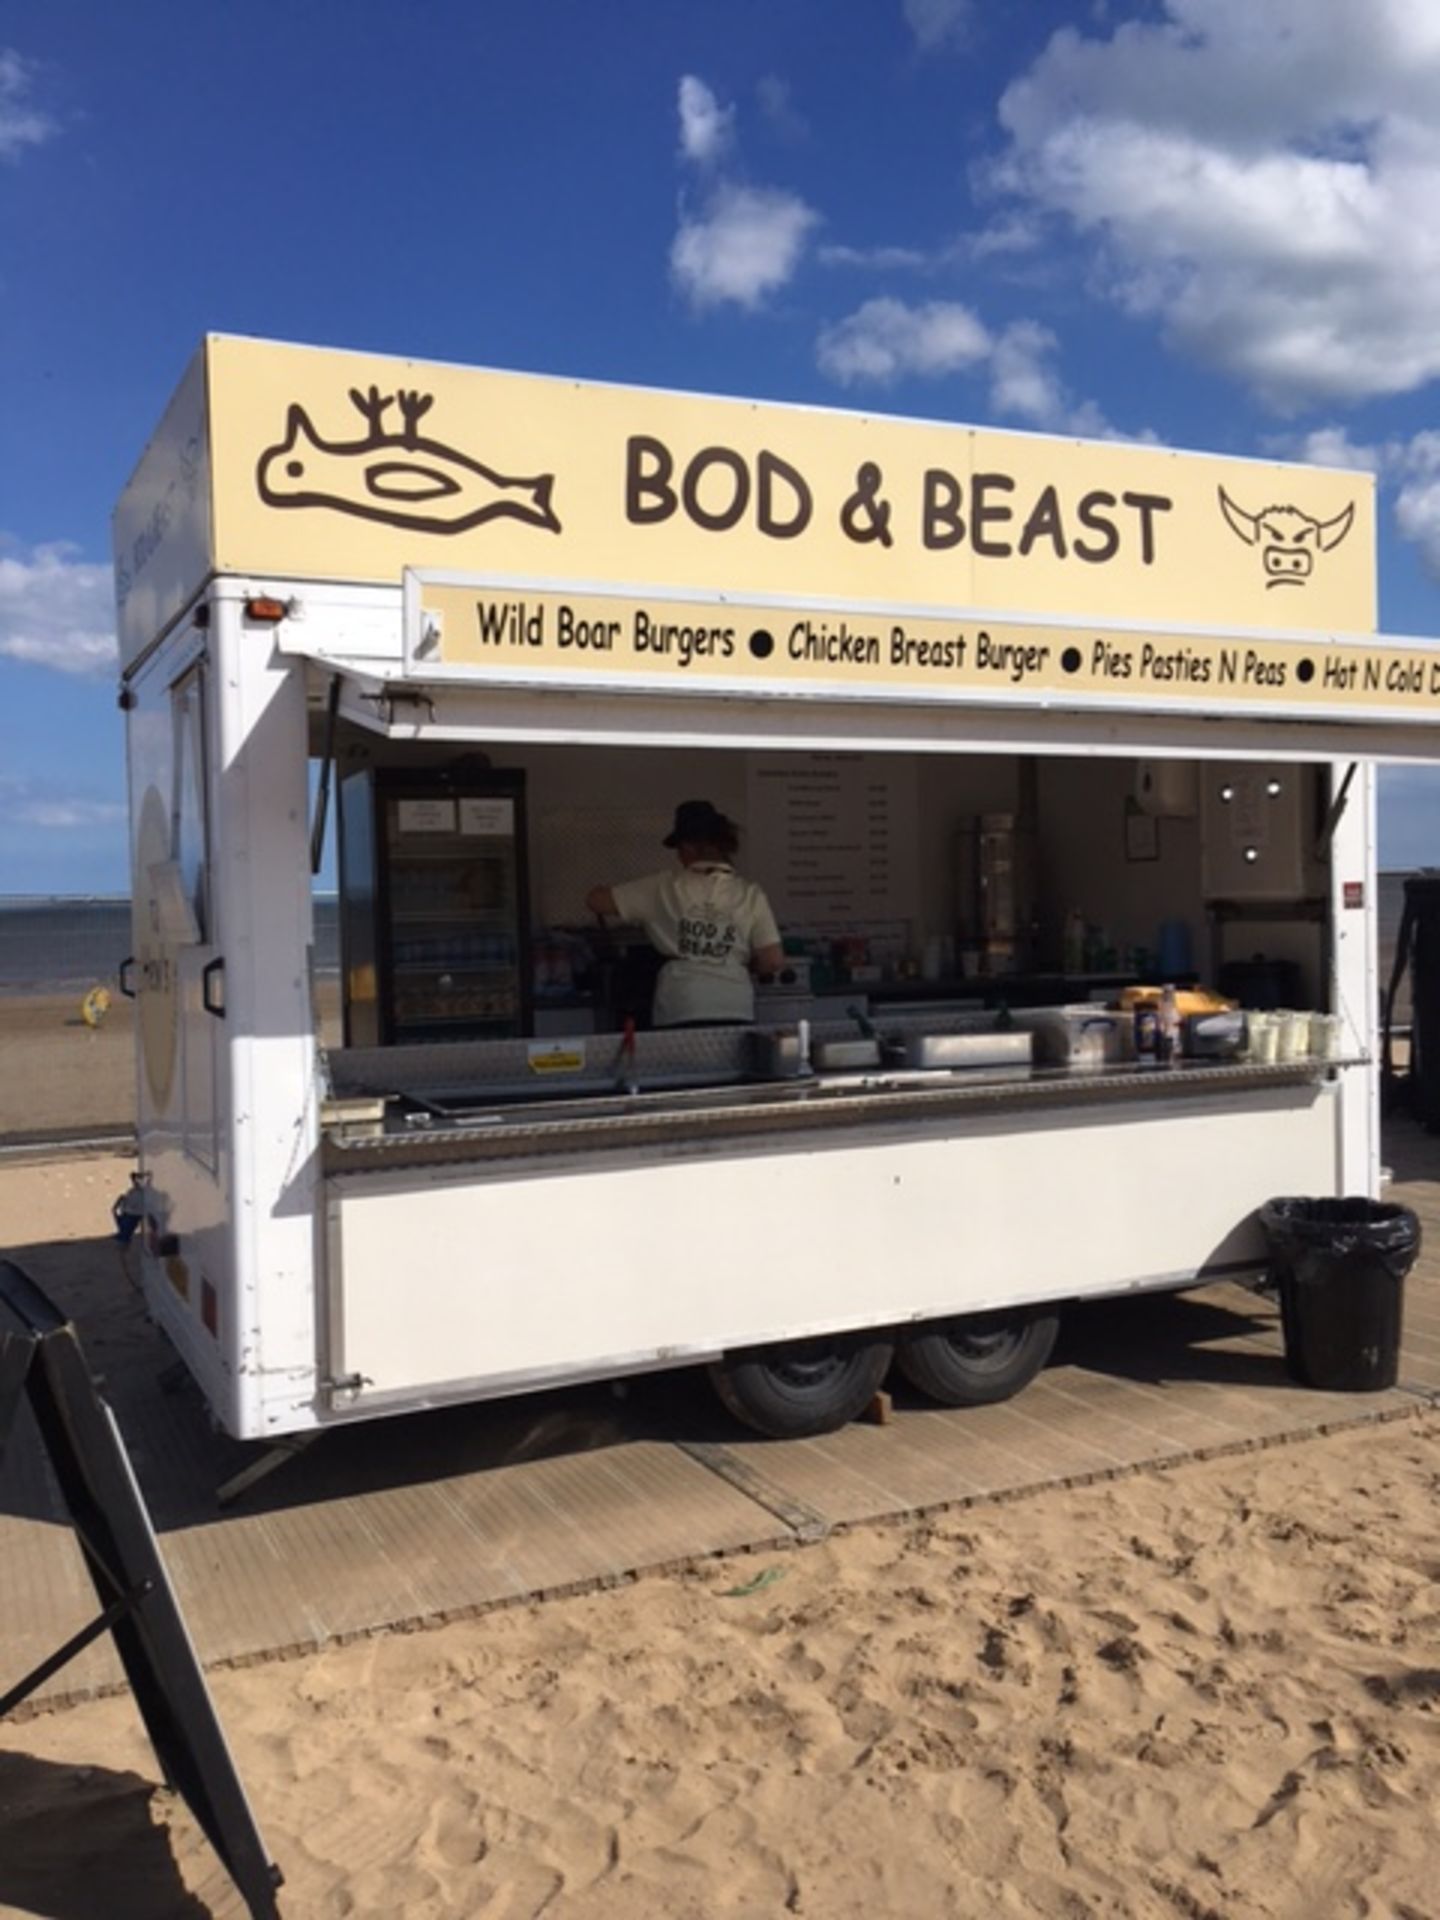 14ft Twin Axle Purpose Built Catering Trailer Fully Equipped and branded "Bod & Beast" on 50mm